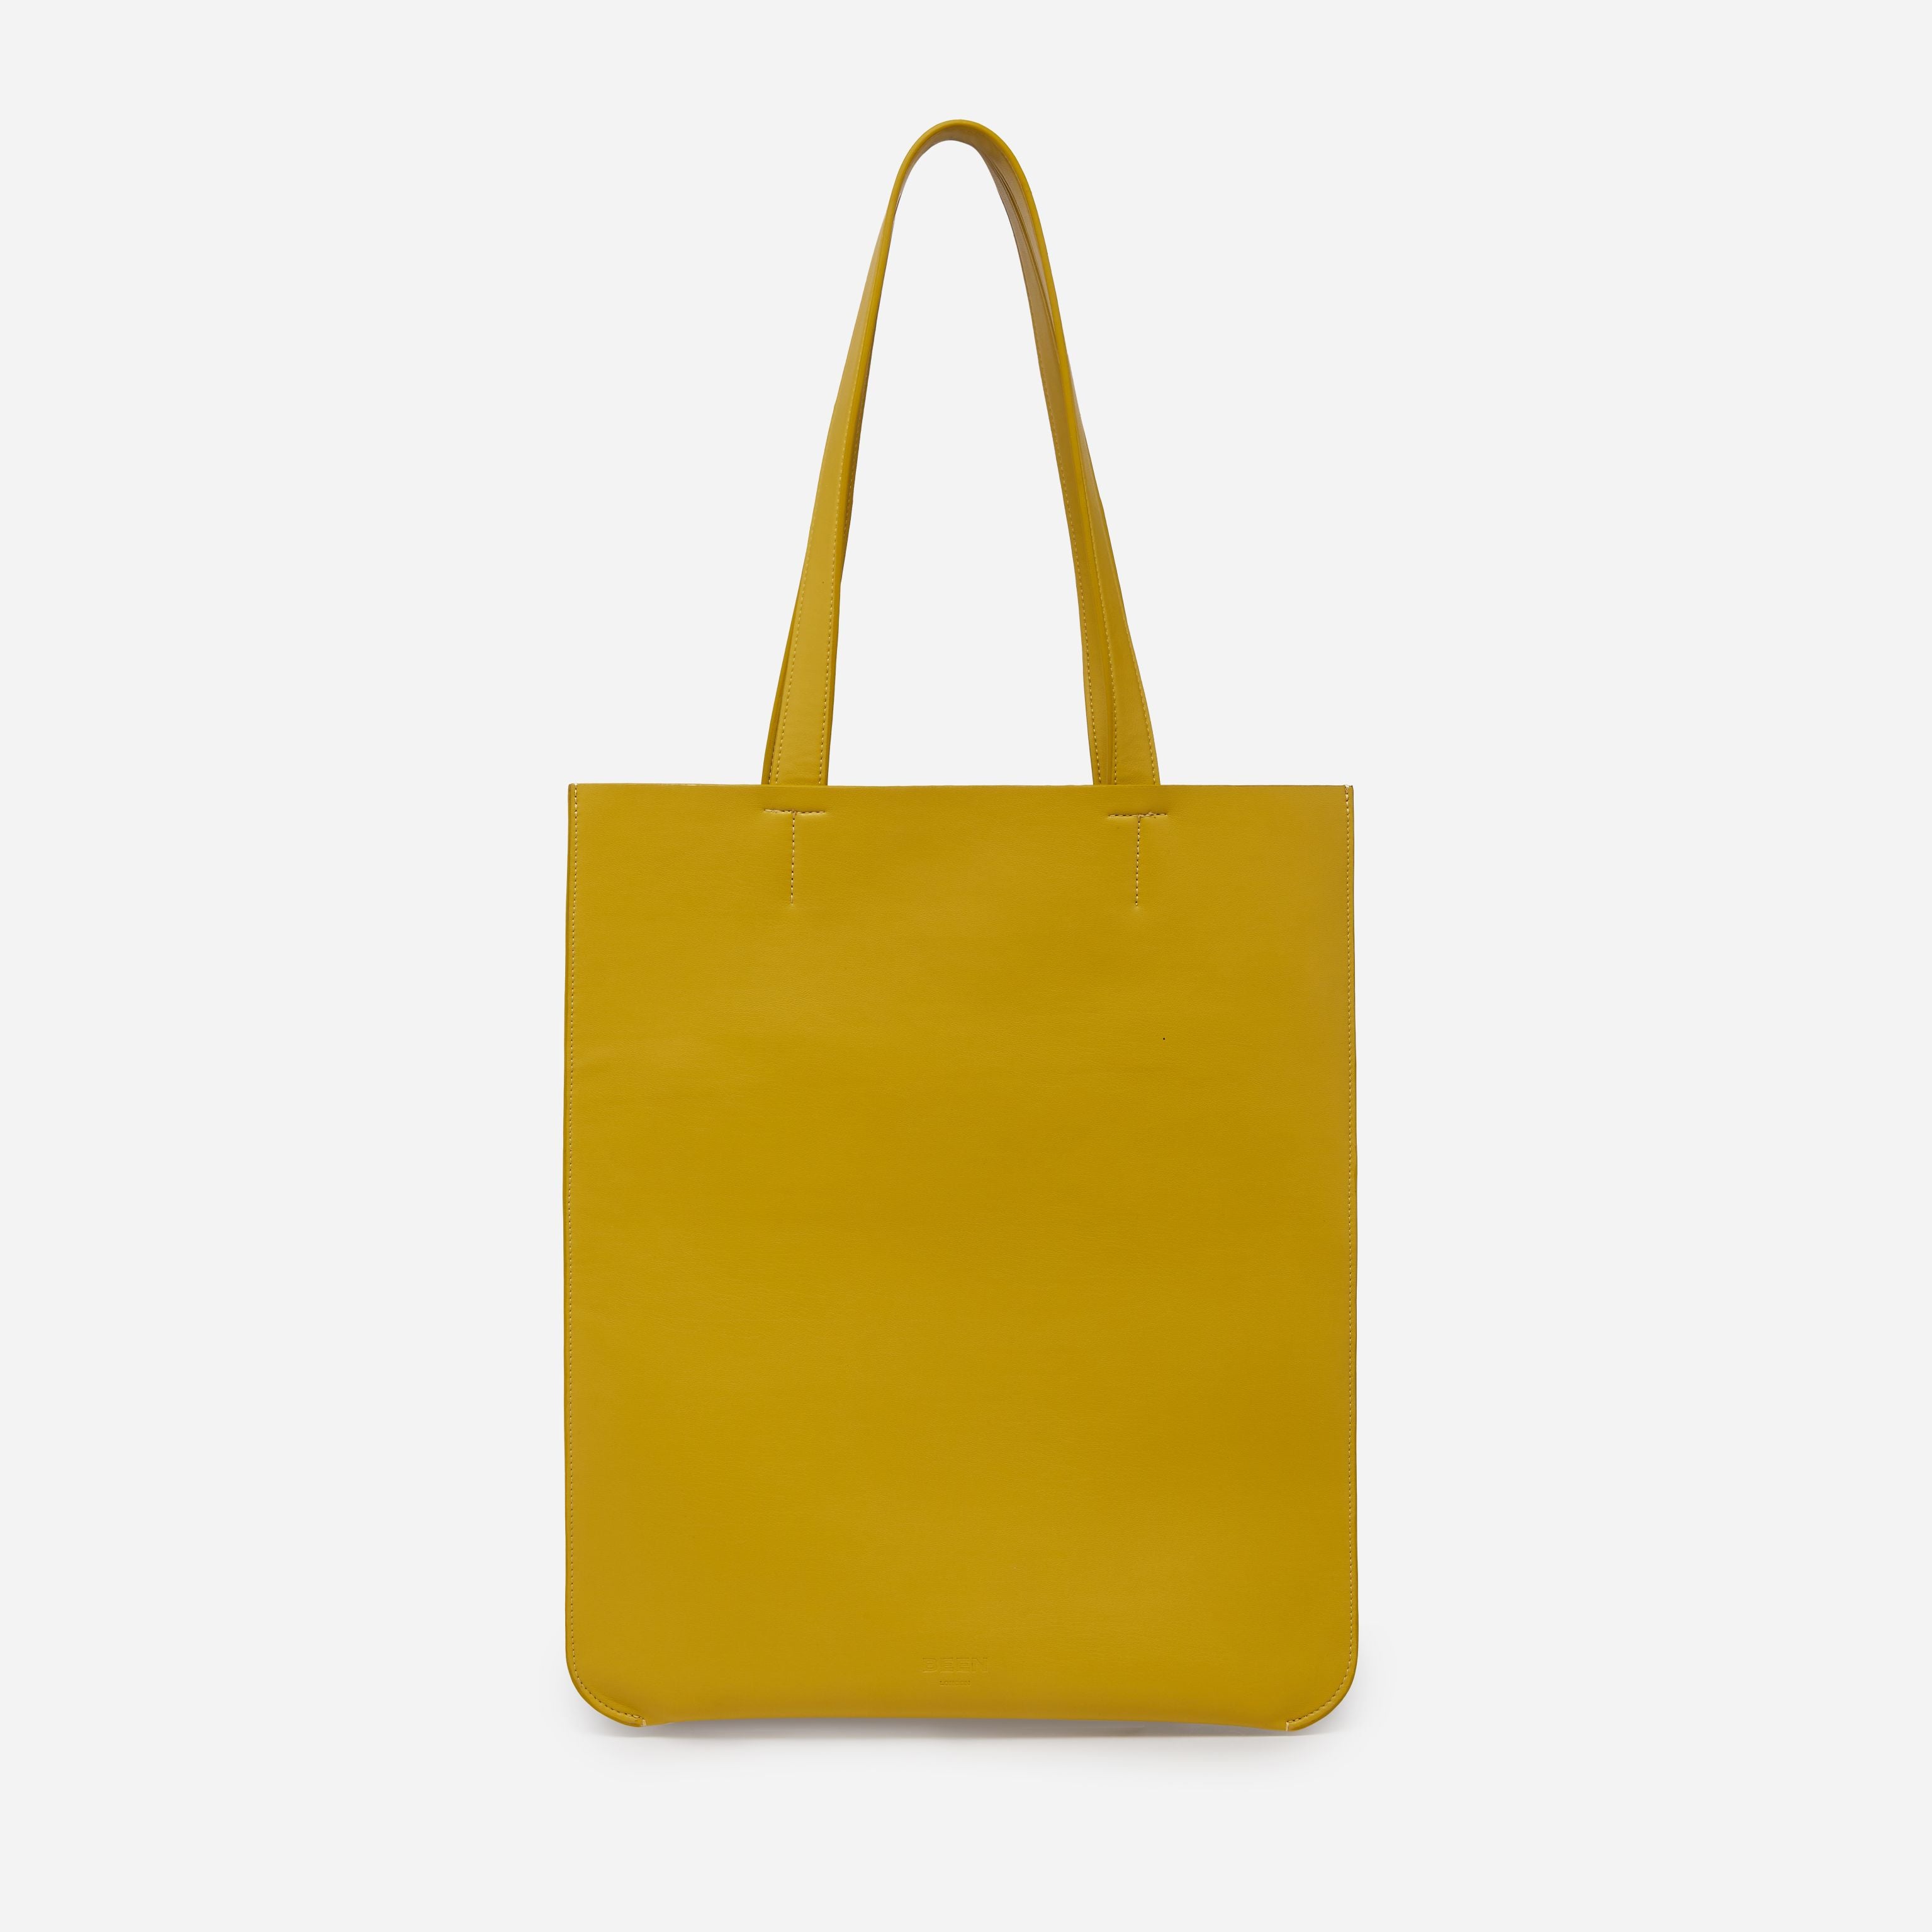 New East Tote Zest